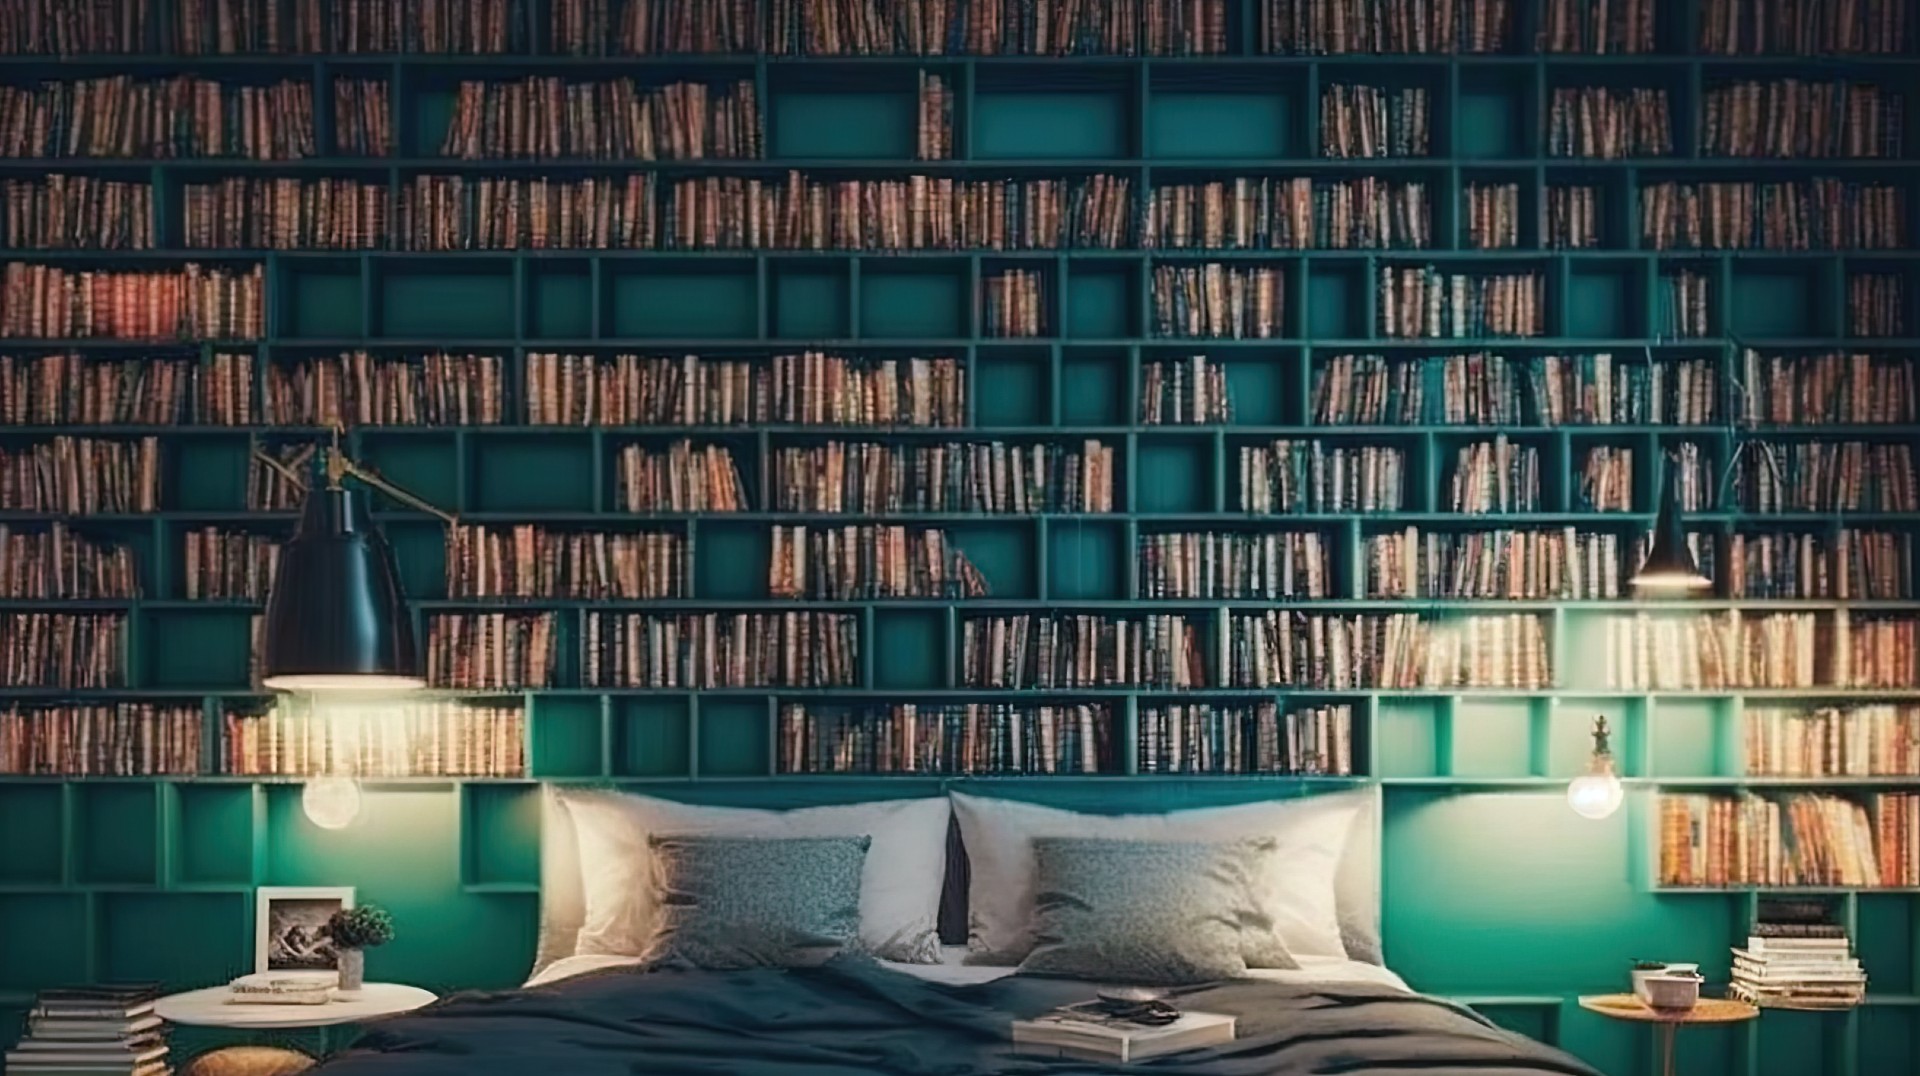 A bed set against a wall of books posing as an oversized headboard